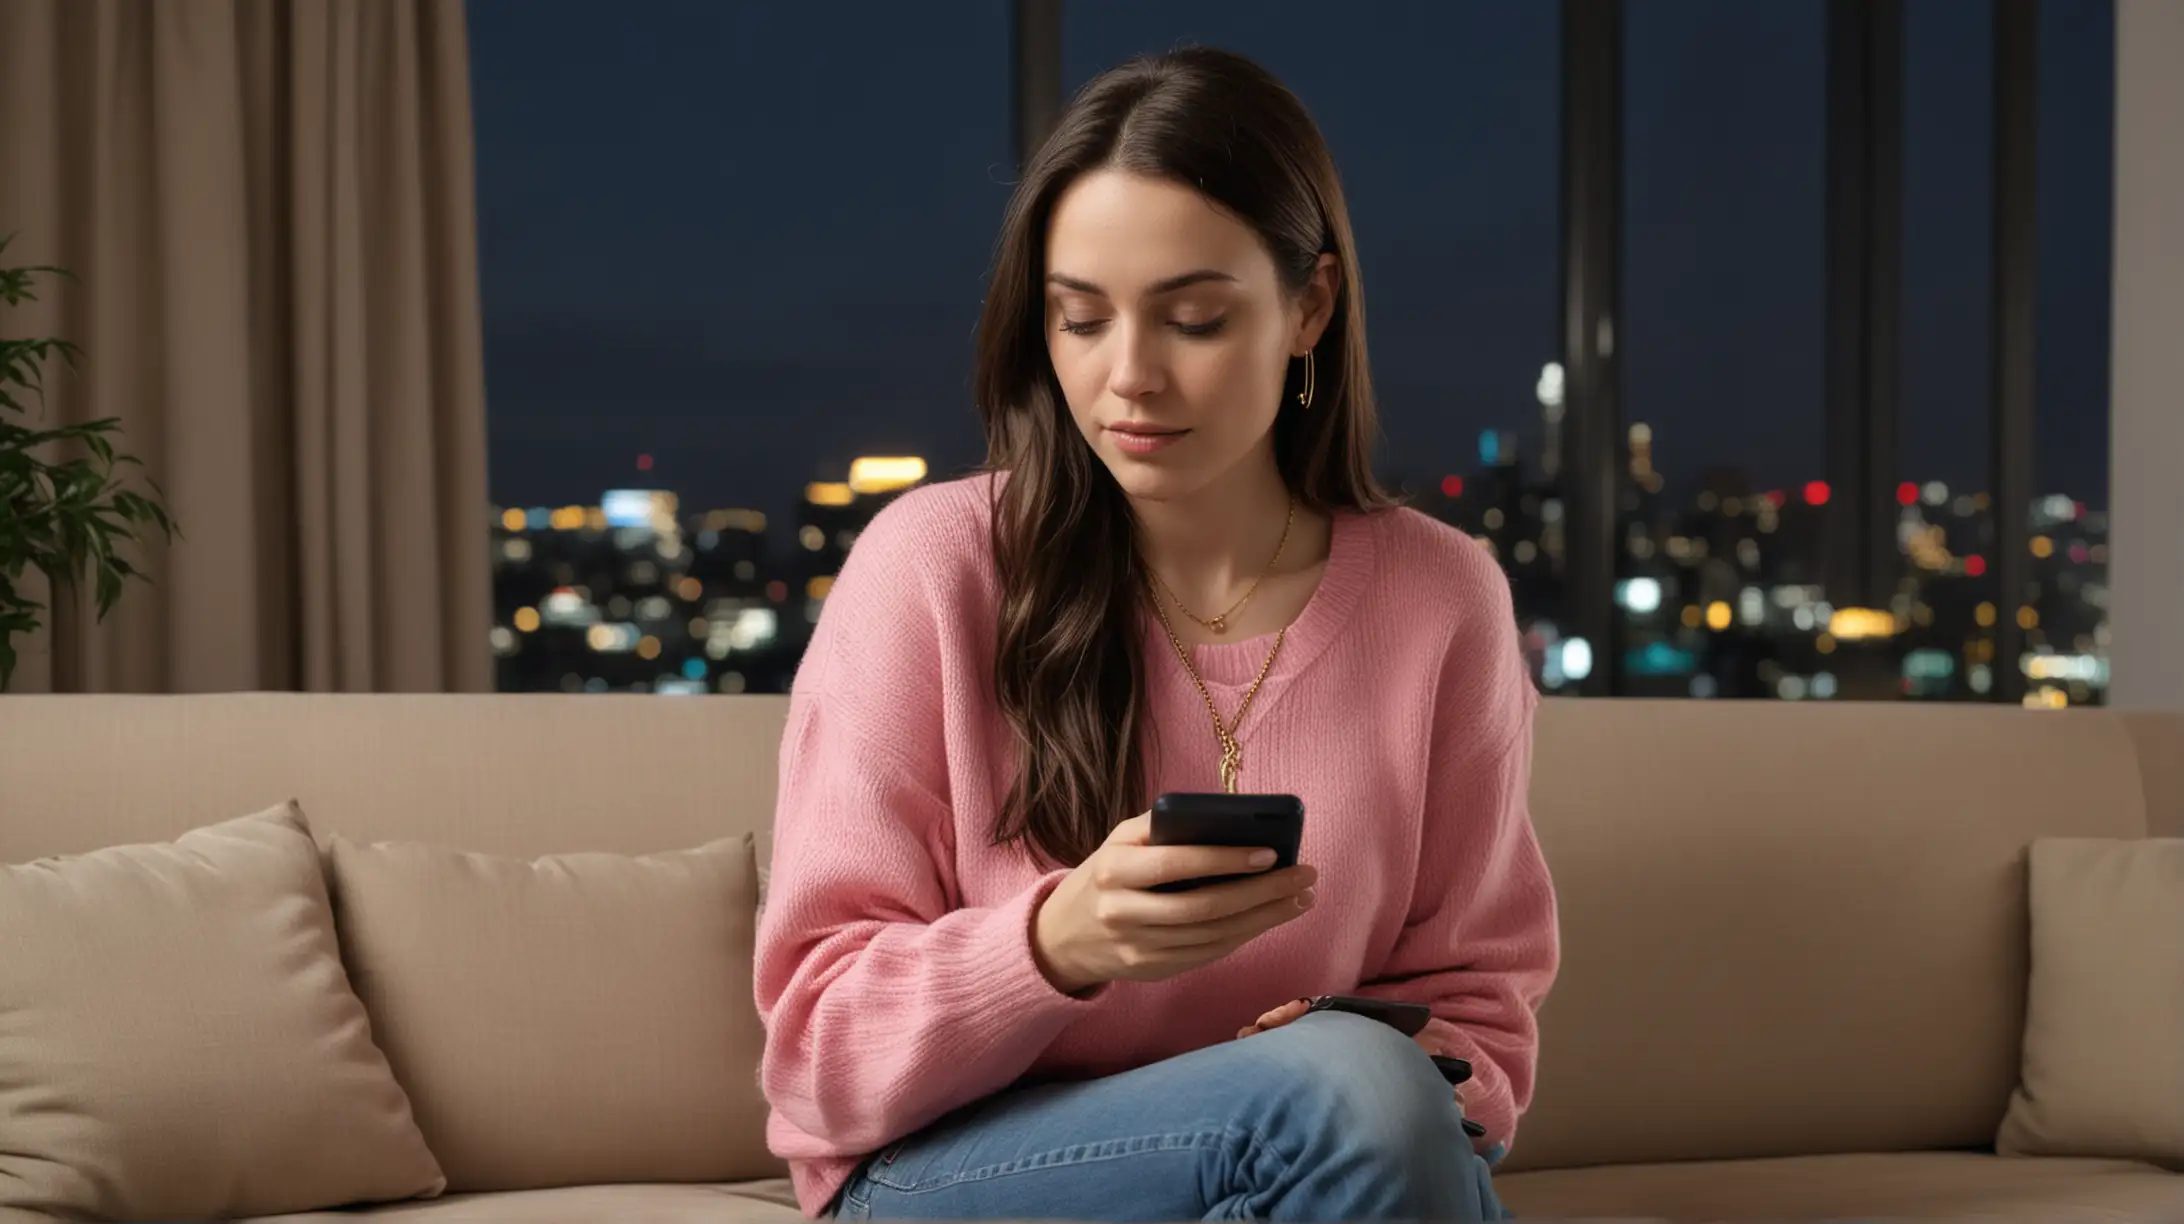 Young Woman Relaxing with Smartphone in Modern Urban Apartment at Night